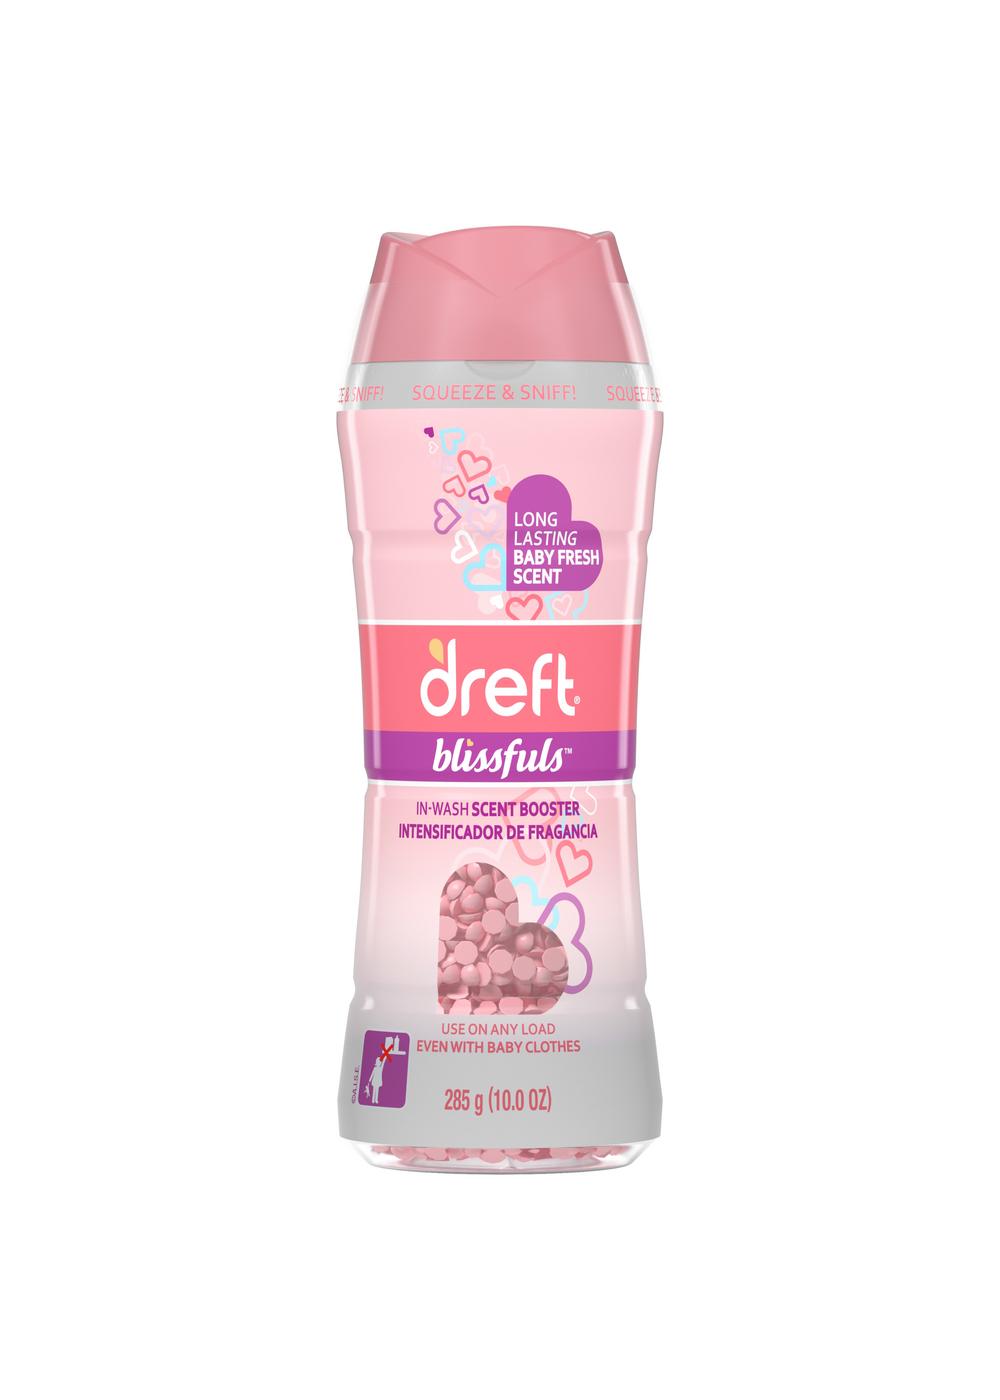 Dreft Blissfuls Baby Fresh In-Wash Scent Booster; image 1 of 3